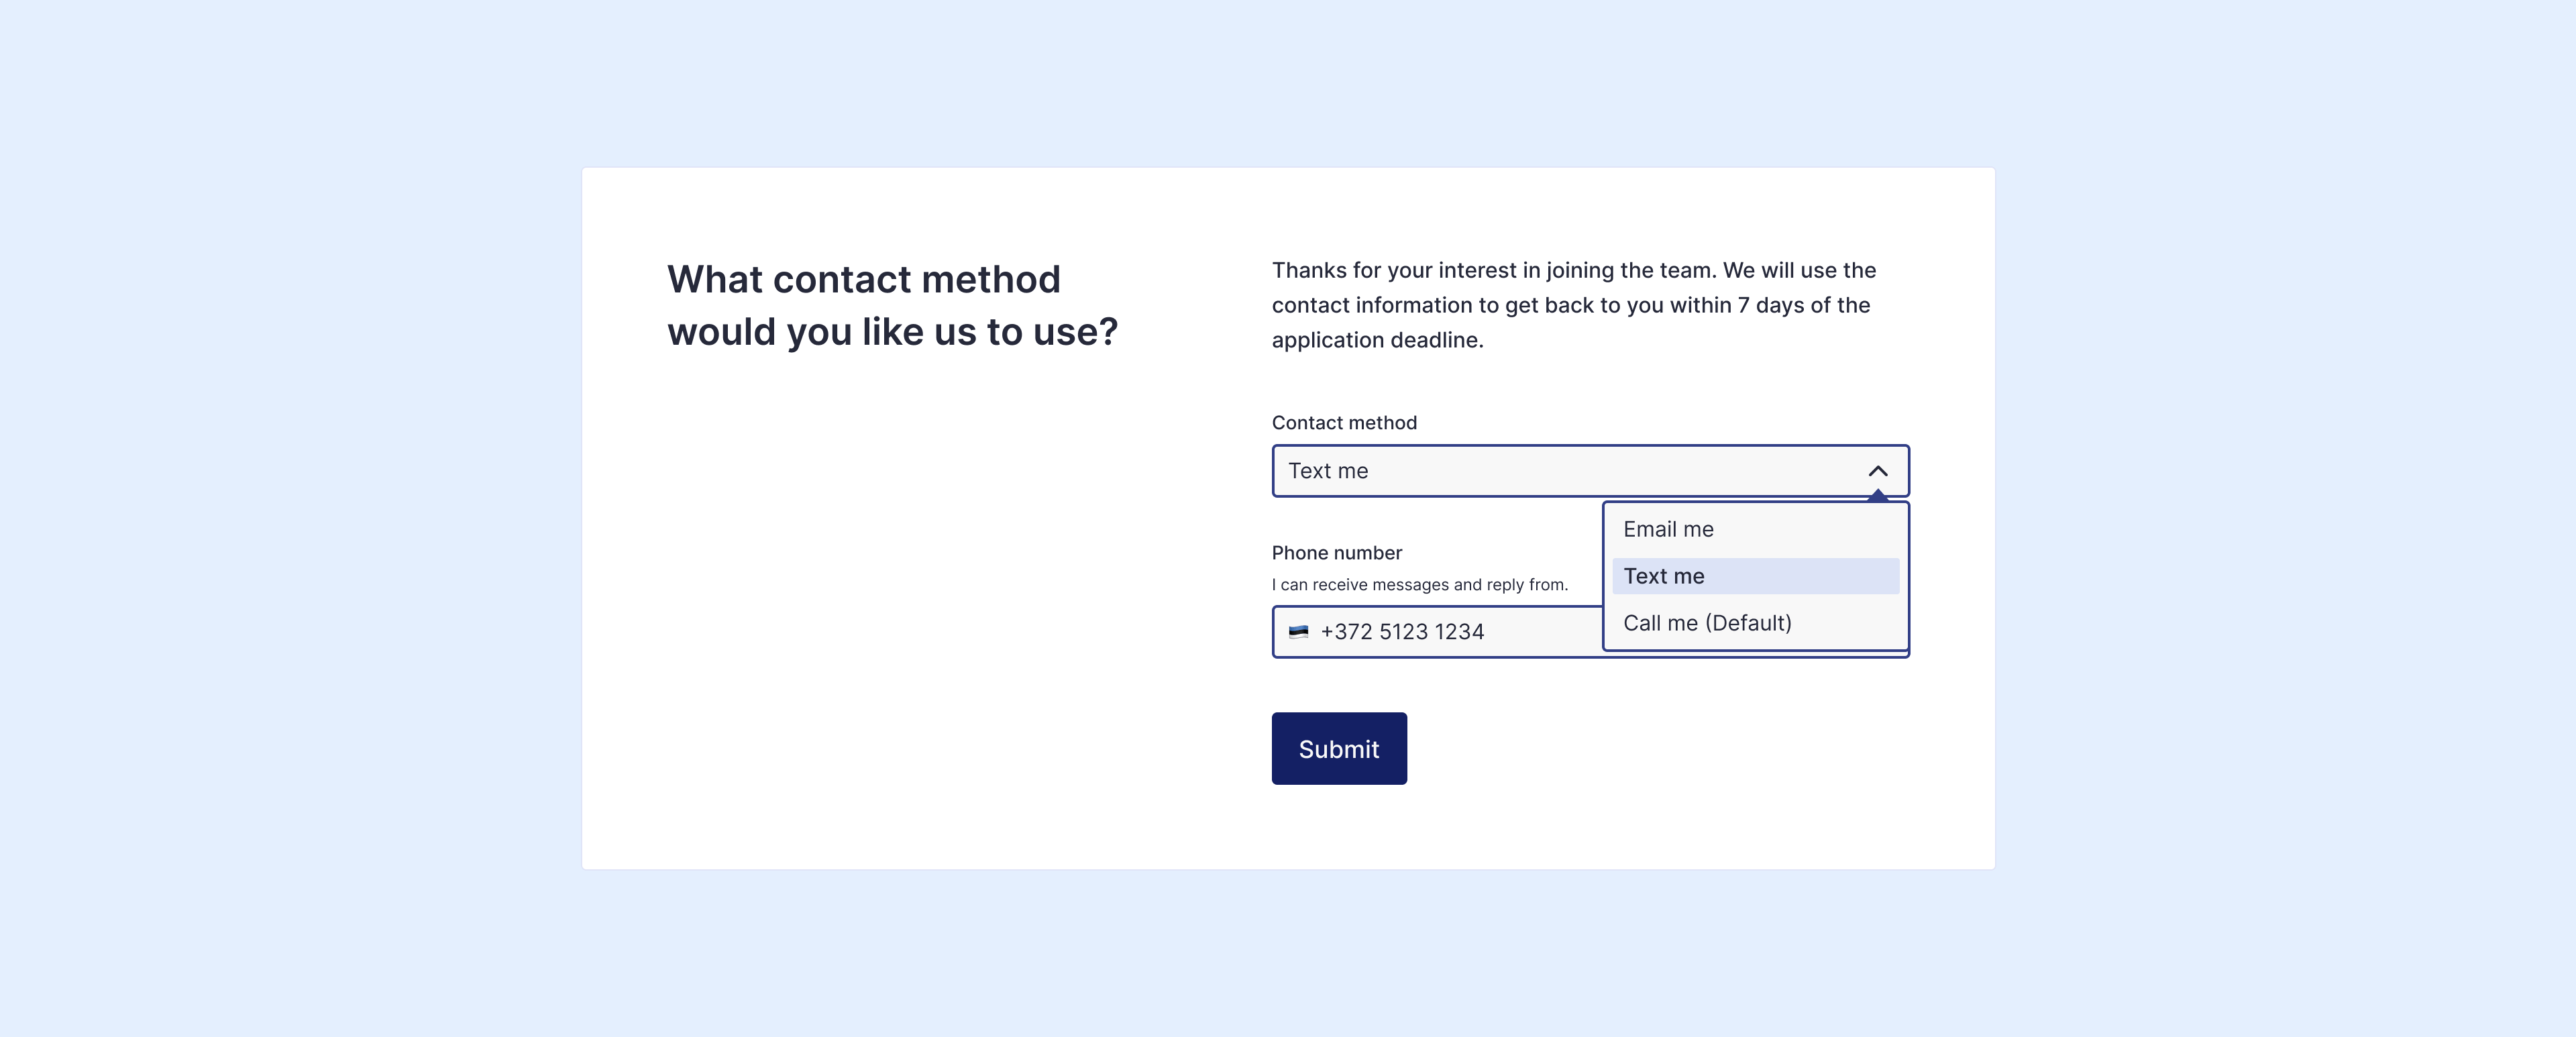 "What contact method would you like us to use?" form with Contact Method offering email me, text me, call me (default) options and it's a required field"